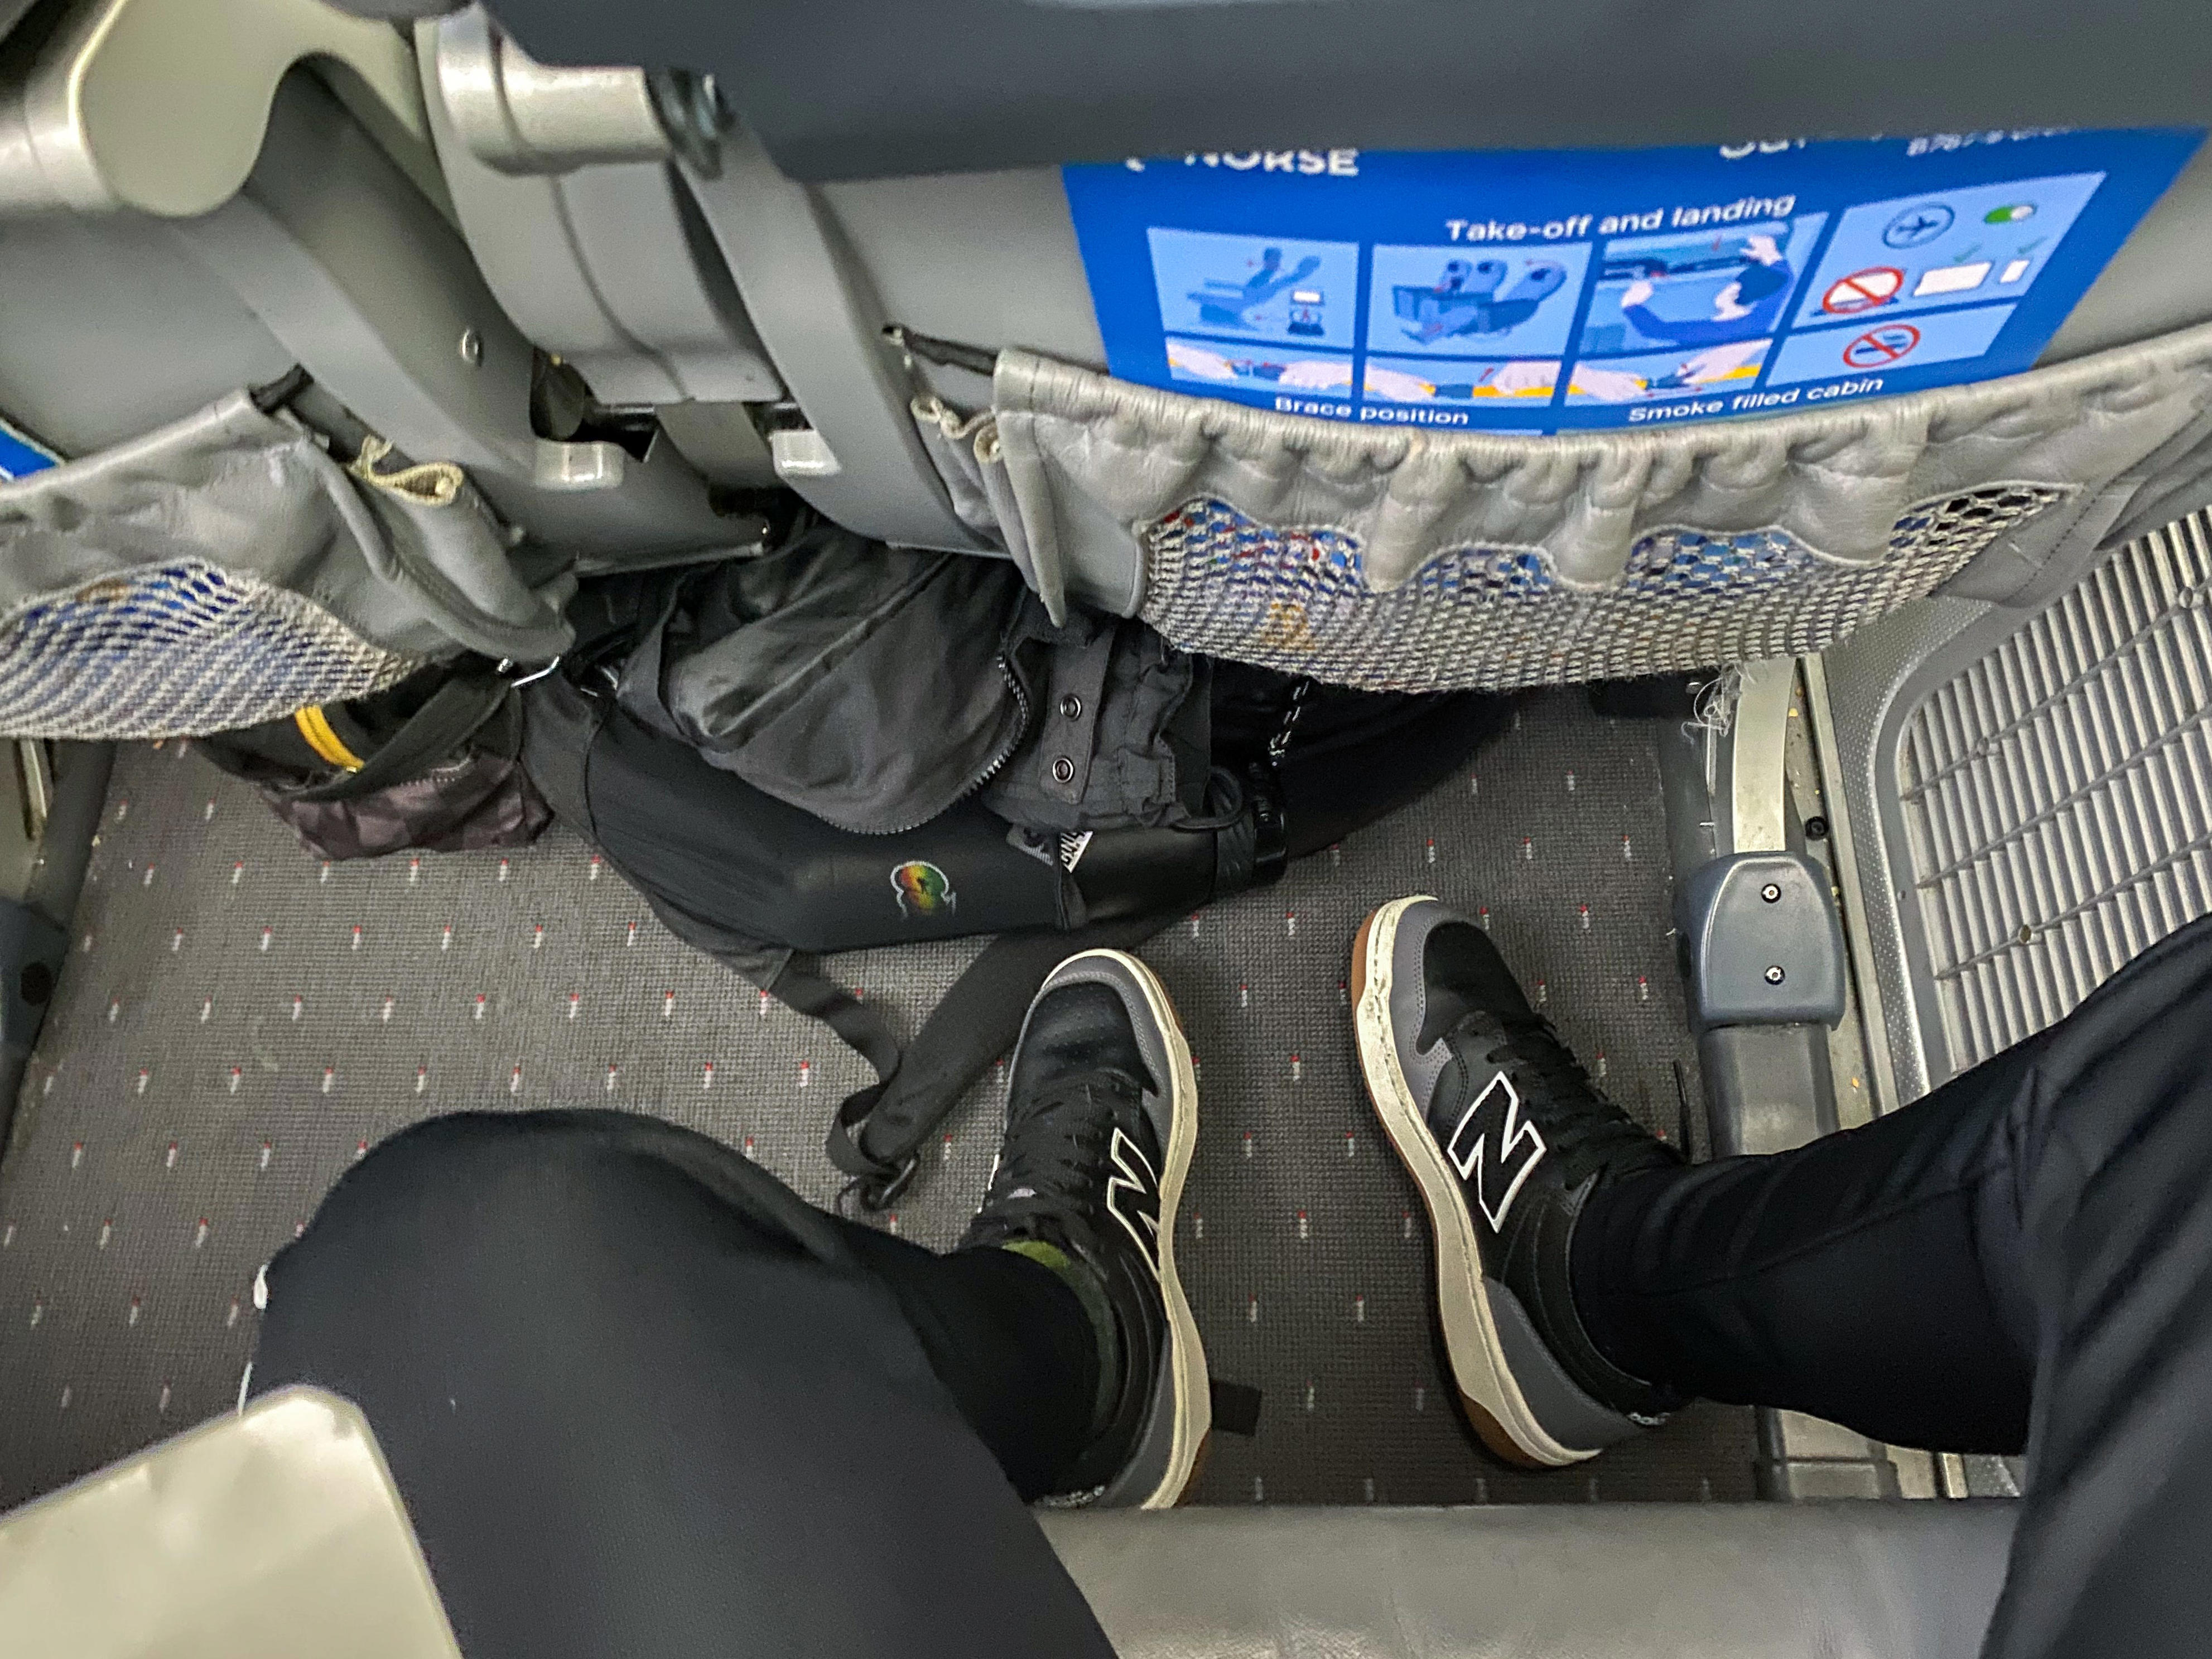 The seat pitch was between 27 and 32 inches, according to the representative. I thought I had enough legroom even with my backpack shoved underneath the seat.